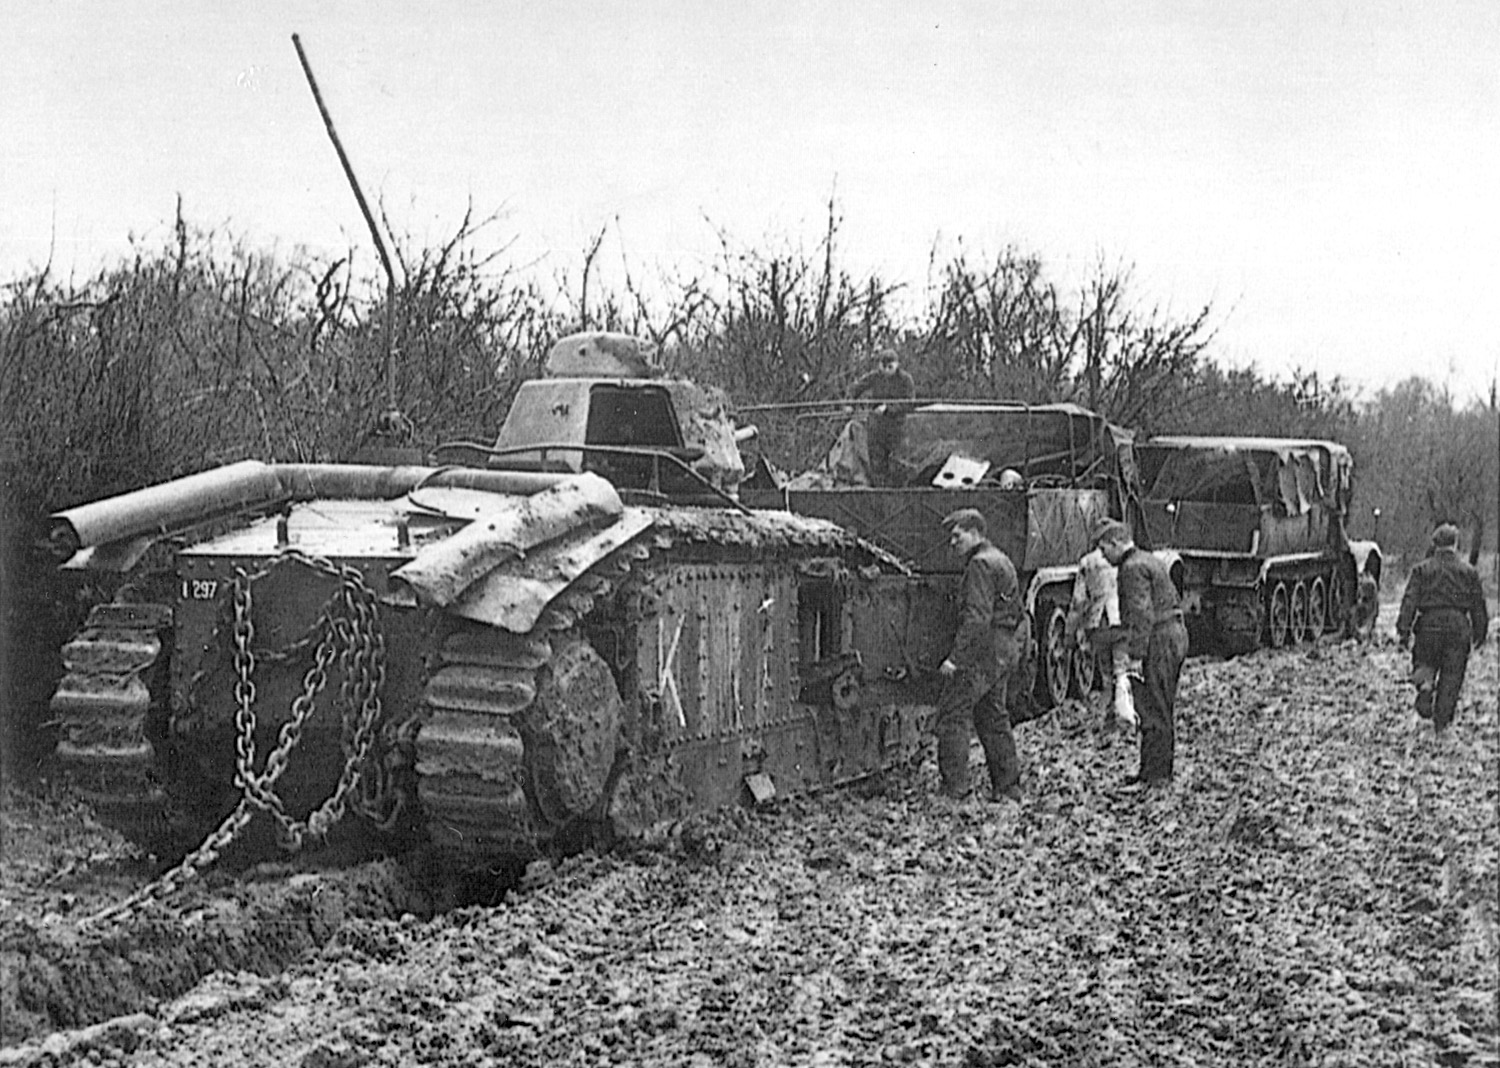 The spoils of war, abandoned French tanks are towed to a railway station for transport to Germany. Along with thousands of men killed, wounded, or captured, the Allies lost vast quantities of war materiel with the fall of France.